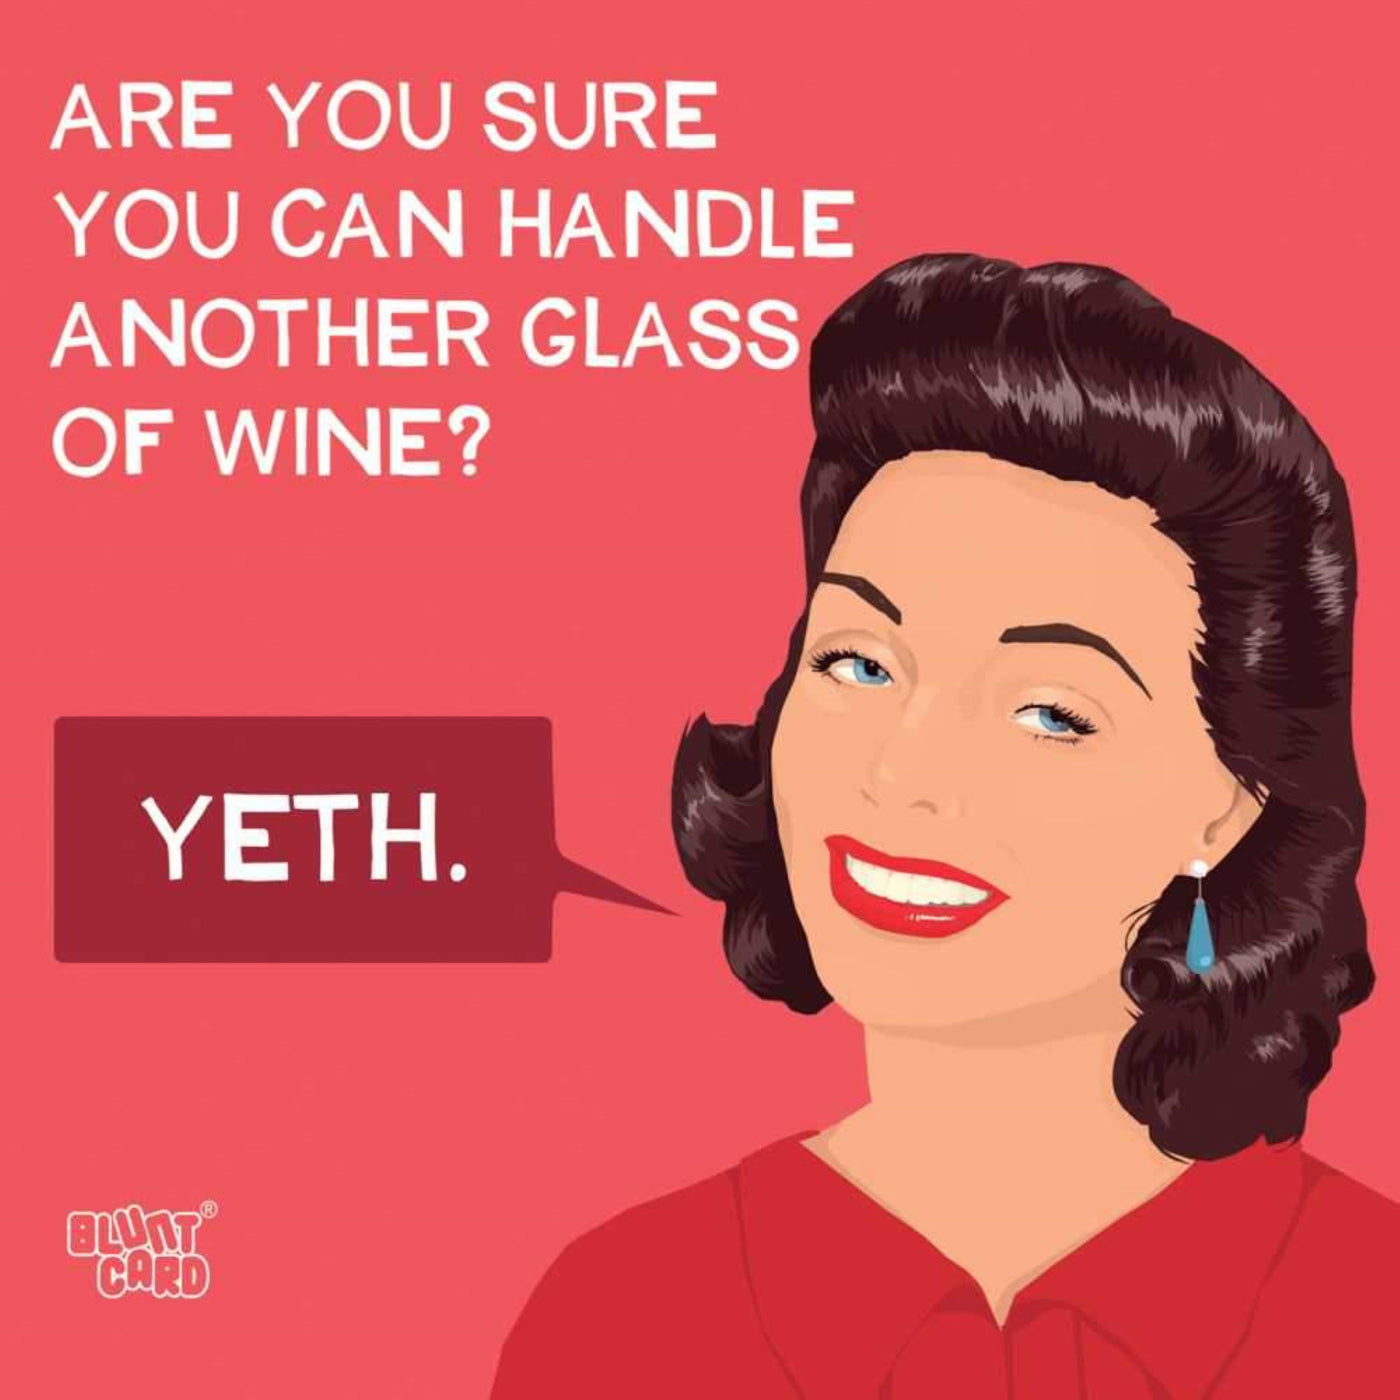 Are You Sure You Can Handle Another Glass of Wine?